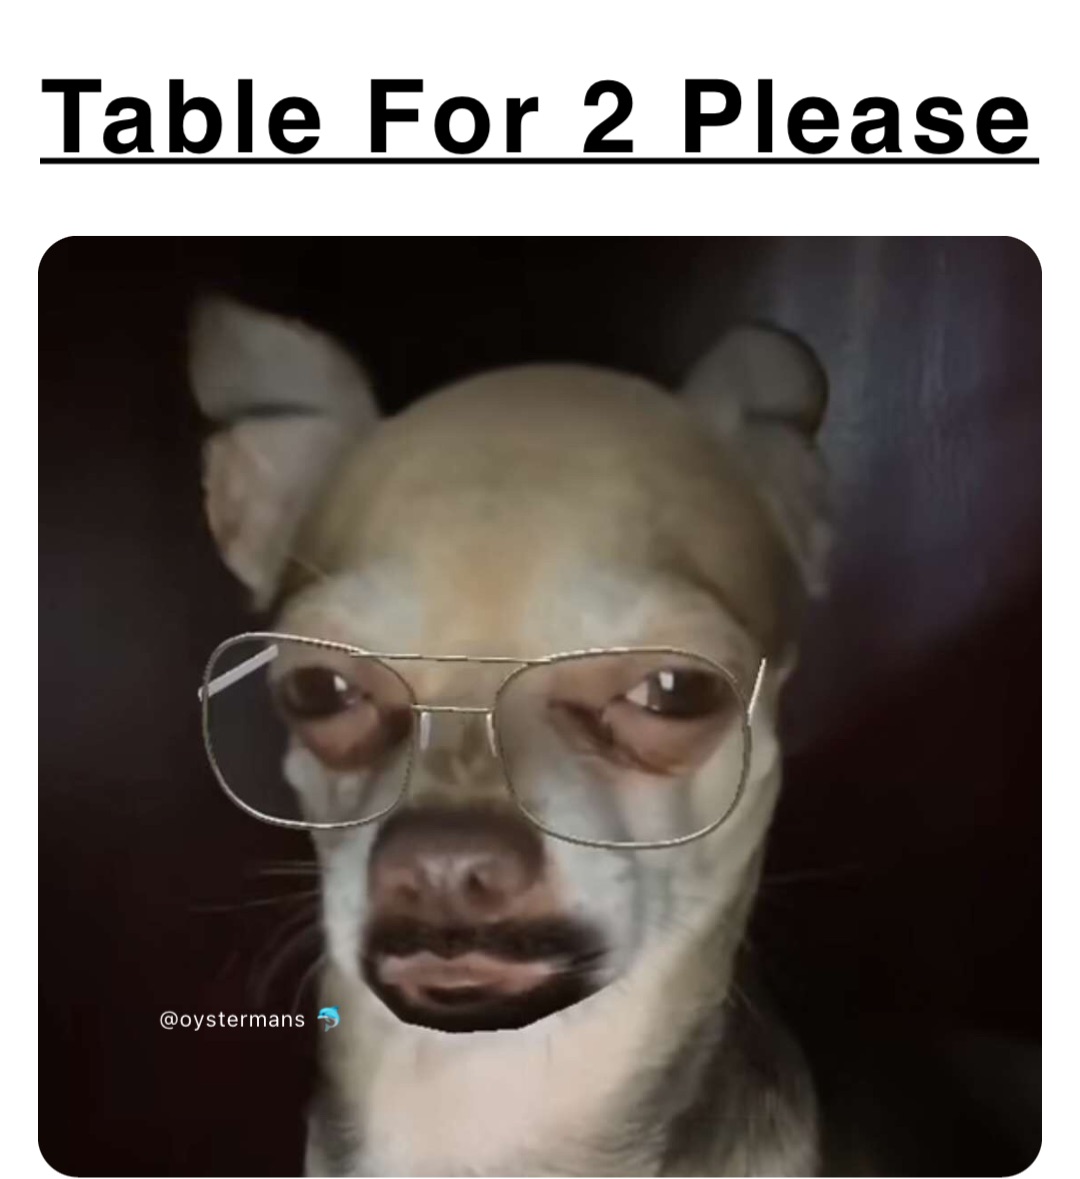 Table For 2 Please